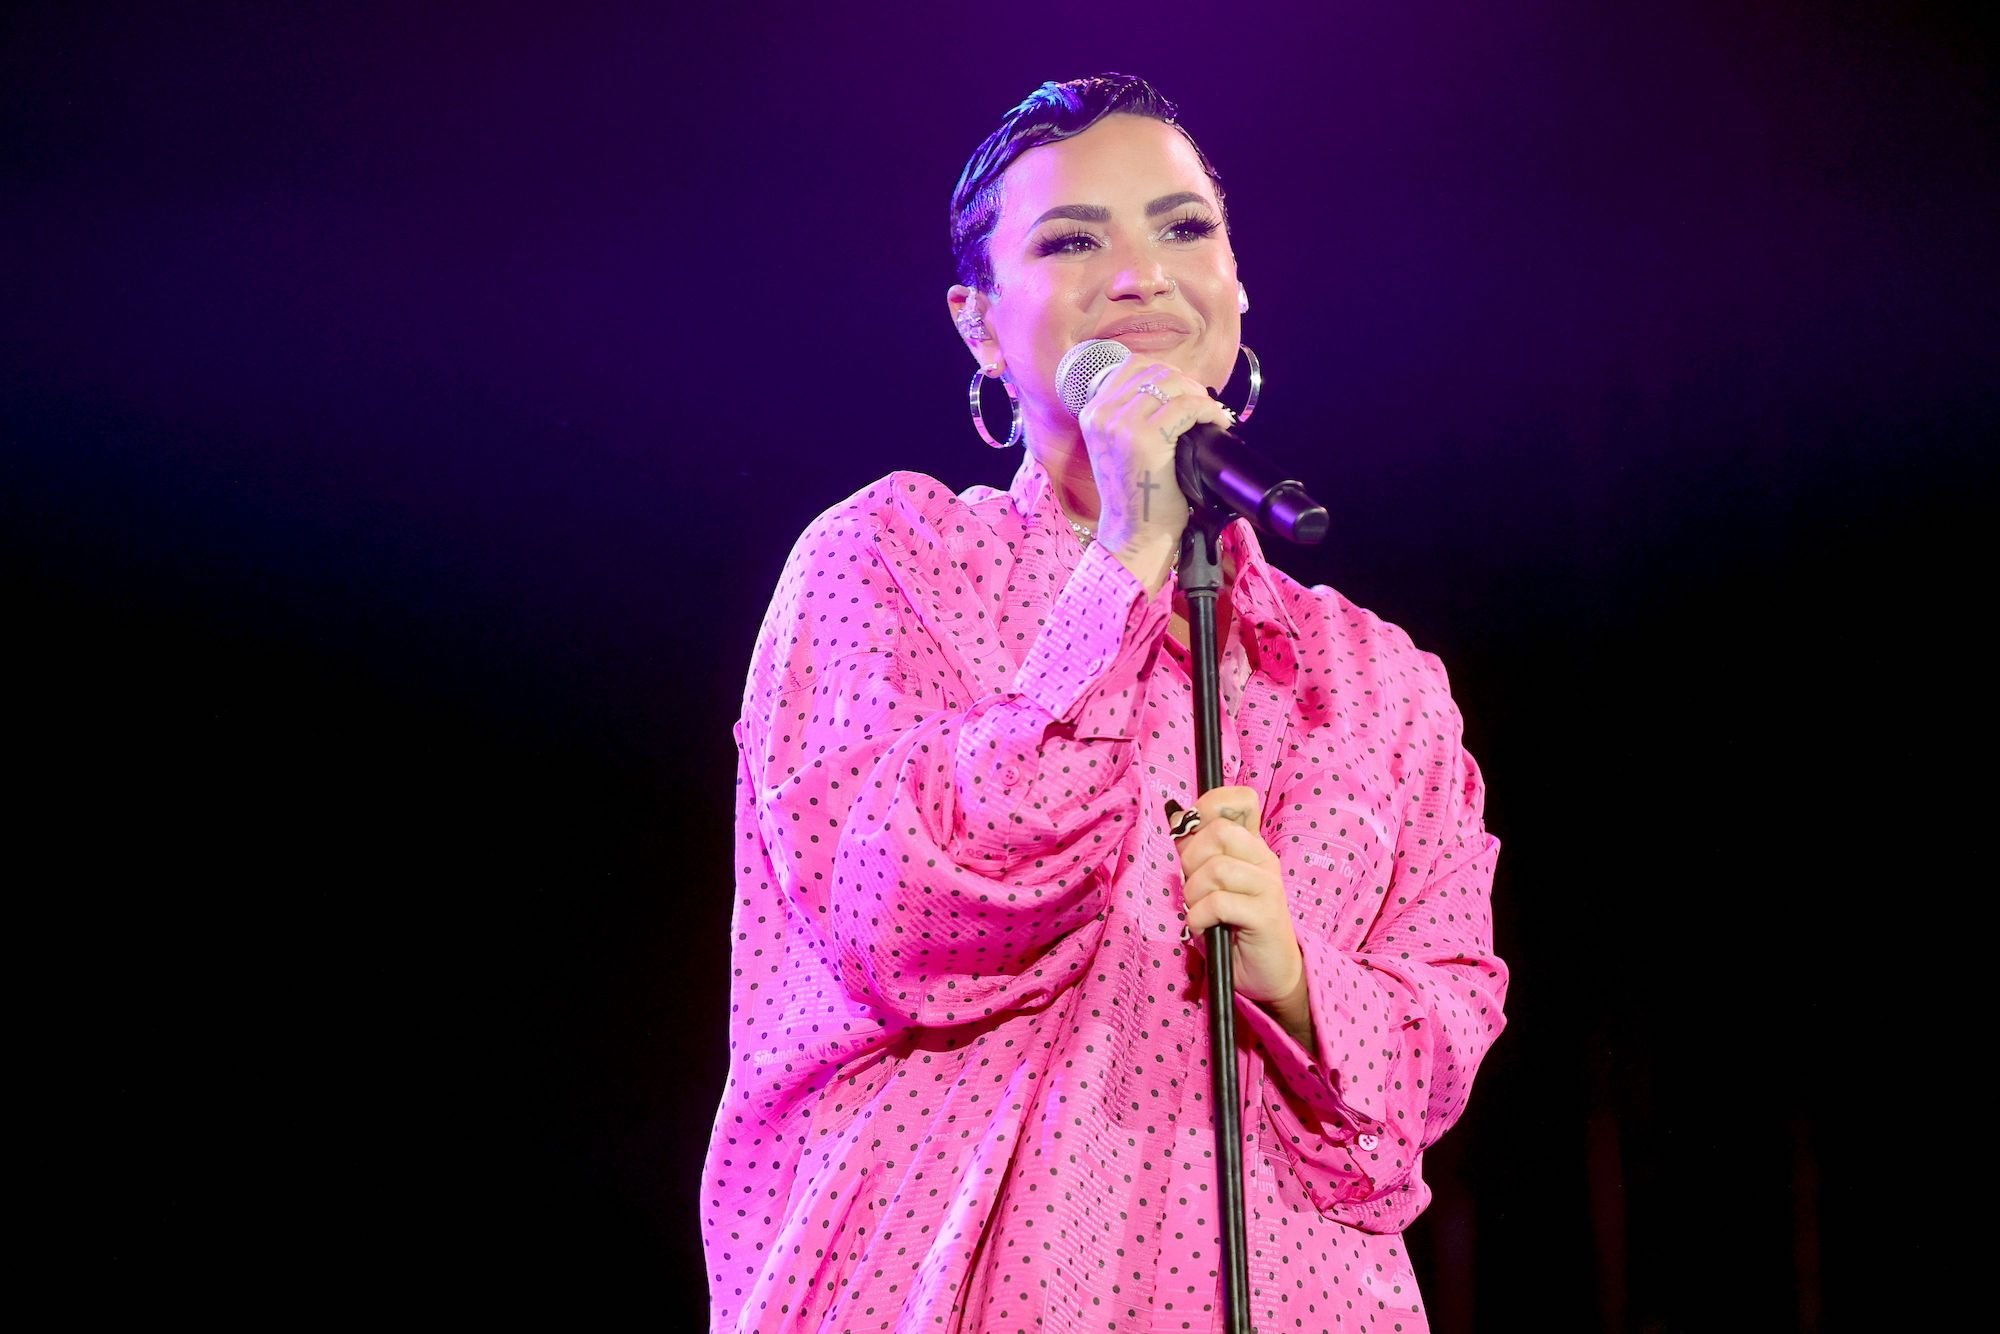 Demi Lovato in a pink shirt onstage